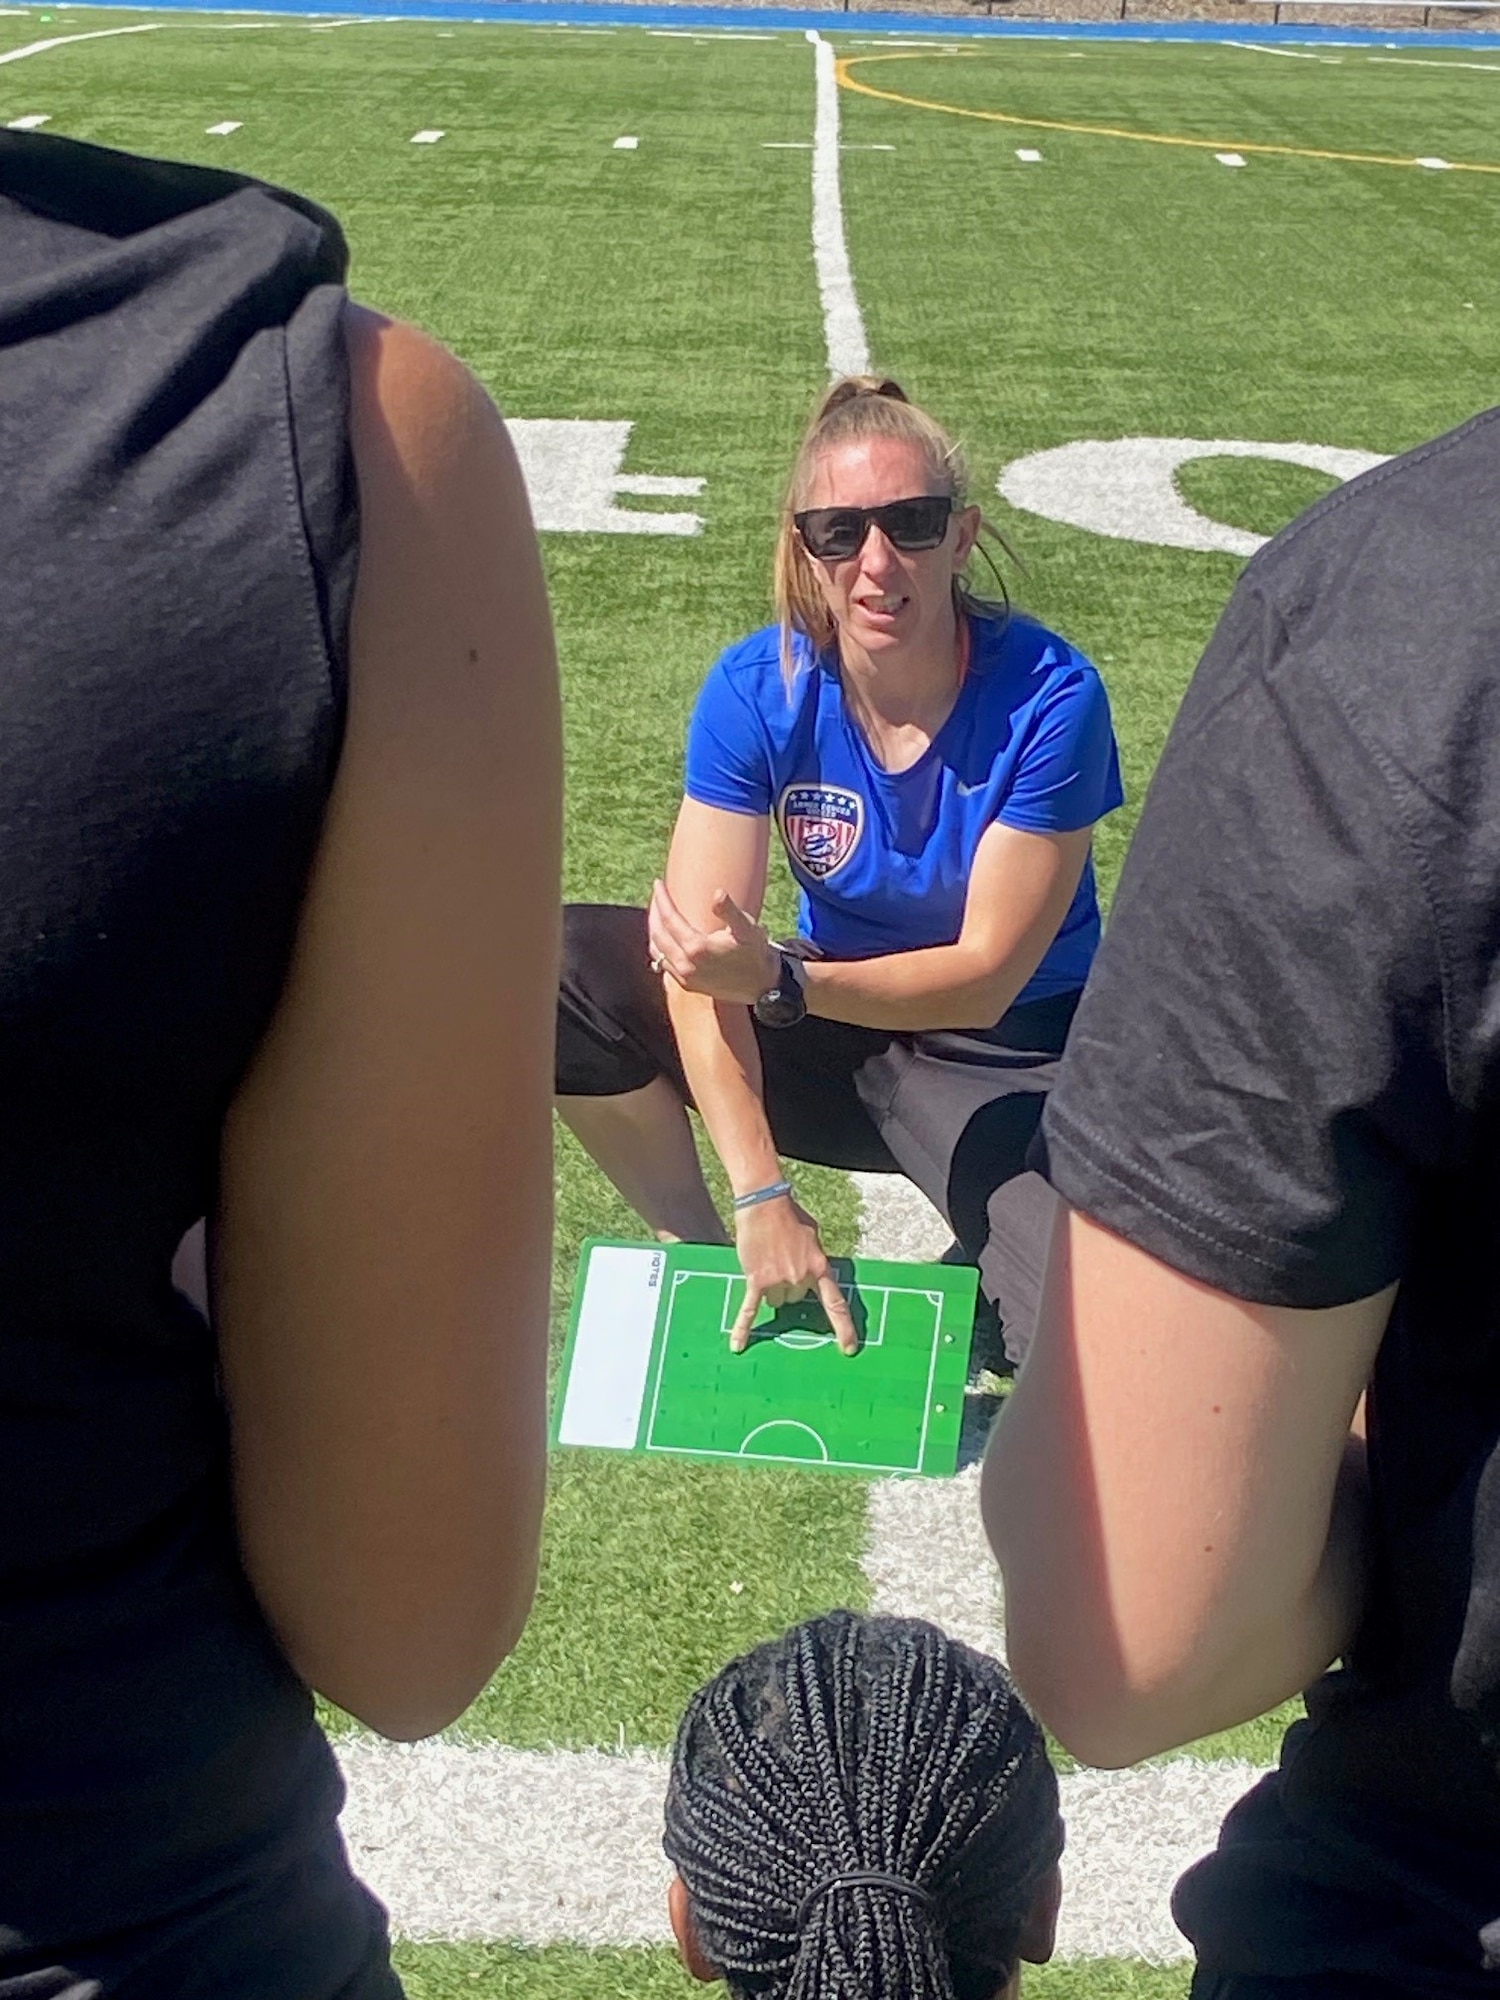 Maj. Erin Issler, an intelligence analyst for the Air Force Life Cycle Management Center, is the head coach of the Armed Forces women's soccer team. In her first International Military Sports Council tournament in 2023, she led the team to a 4-1 record and fifth place overall.